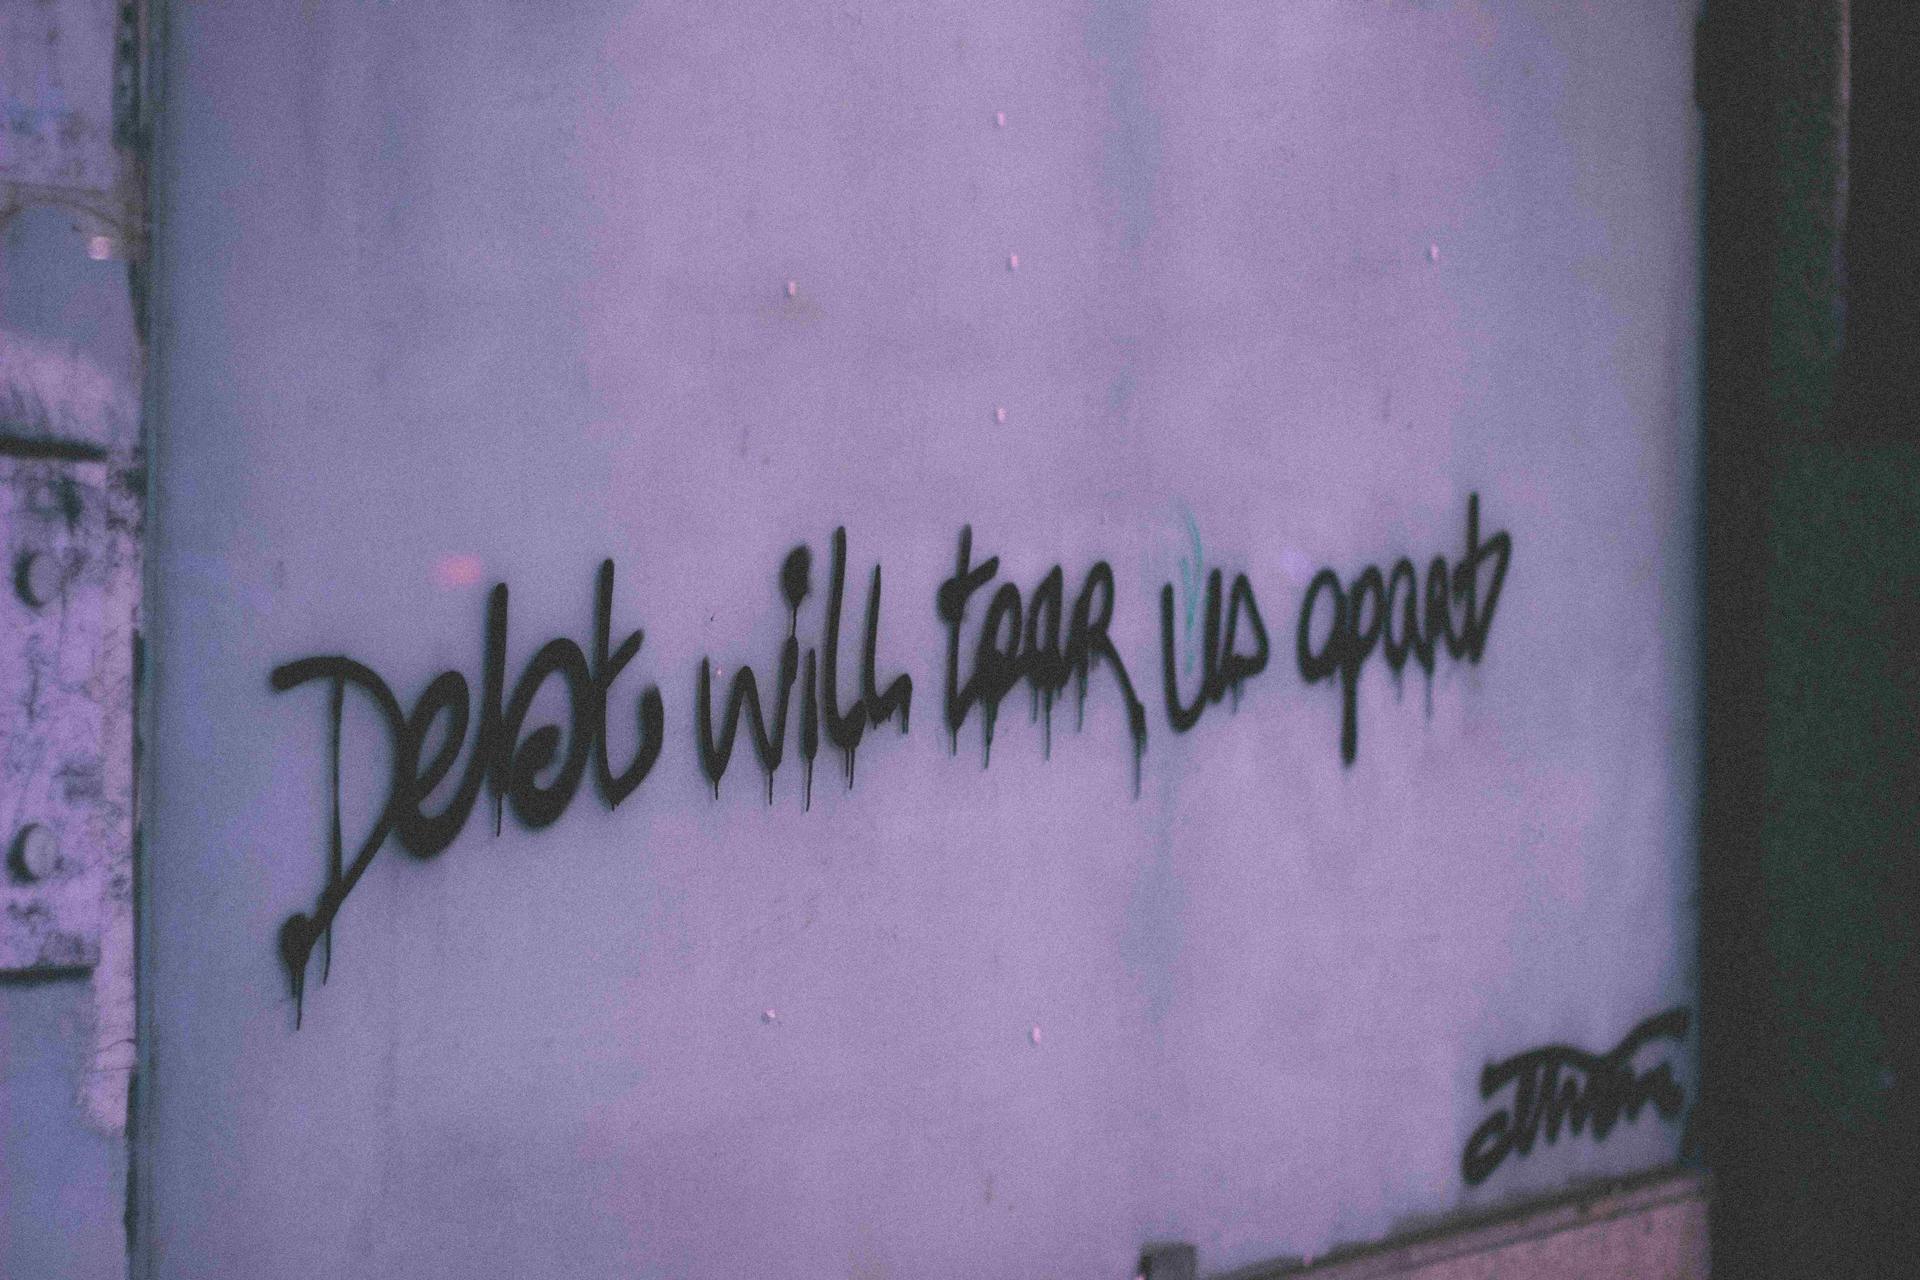 A writing on the wall says "Debt will tear us apart"